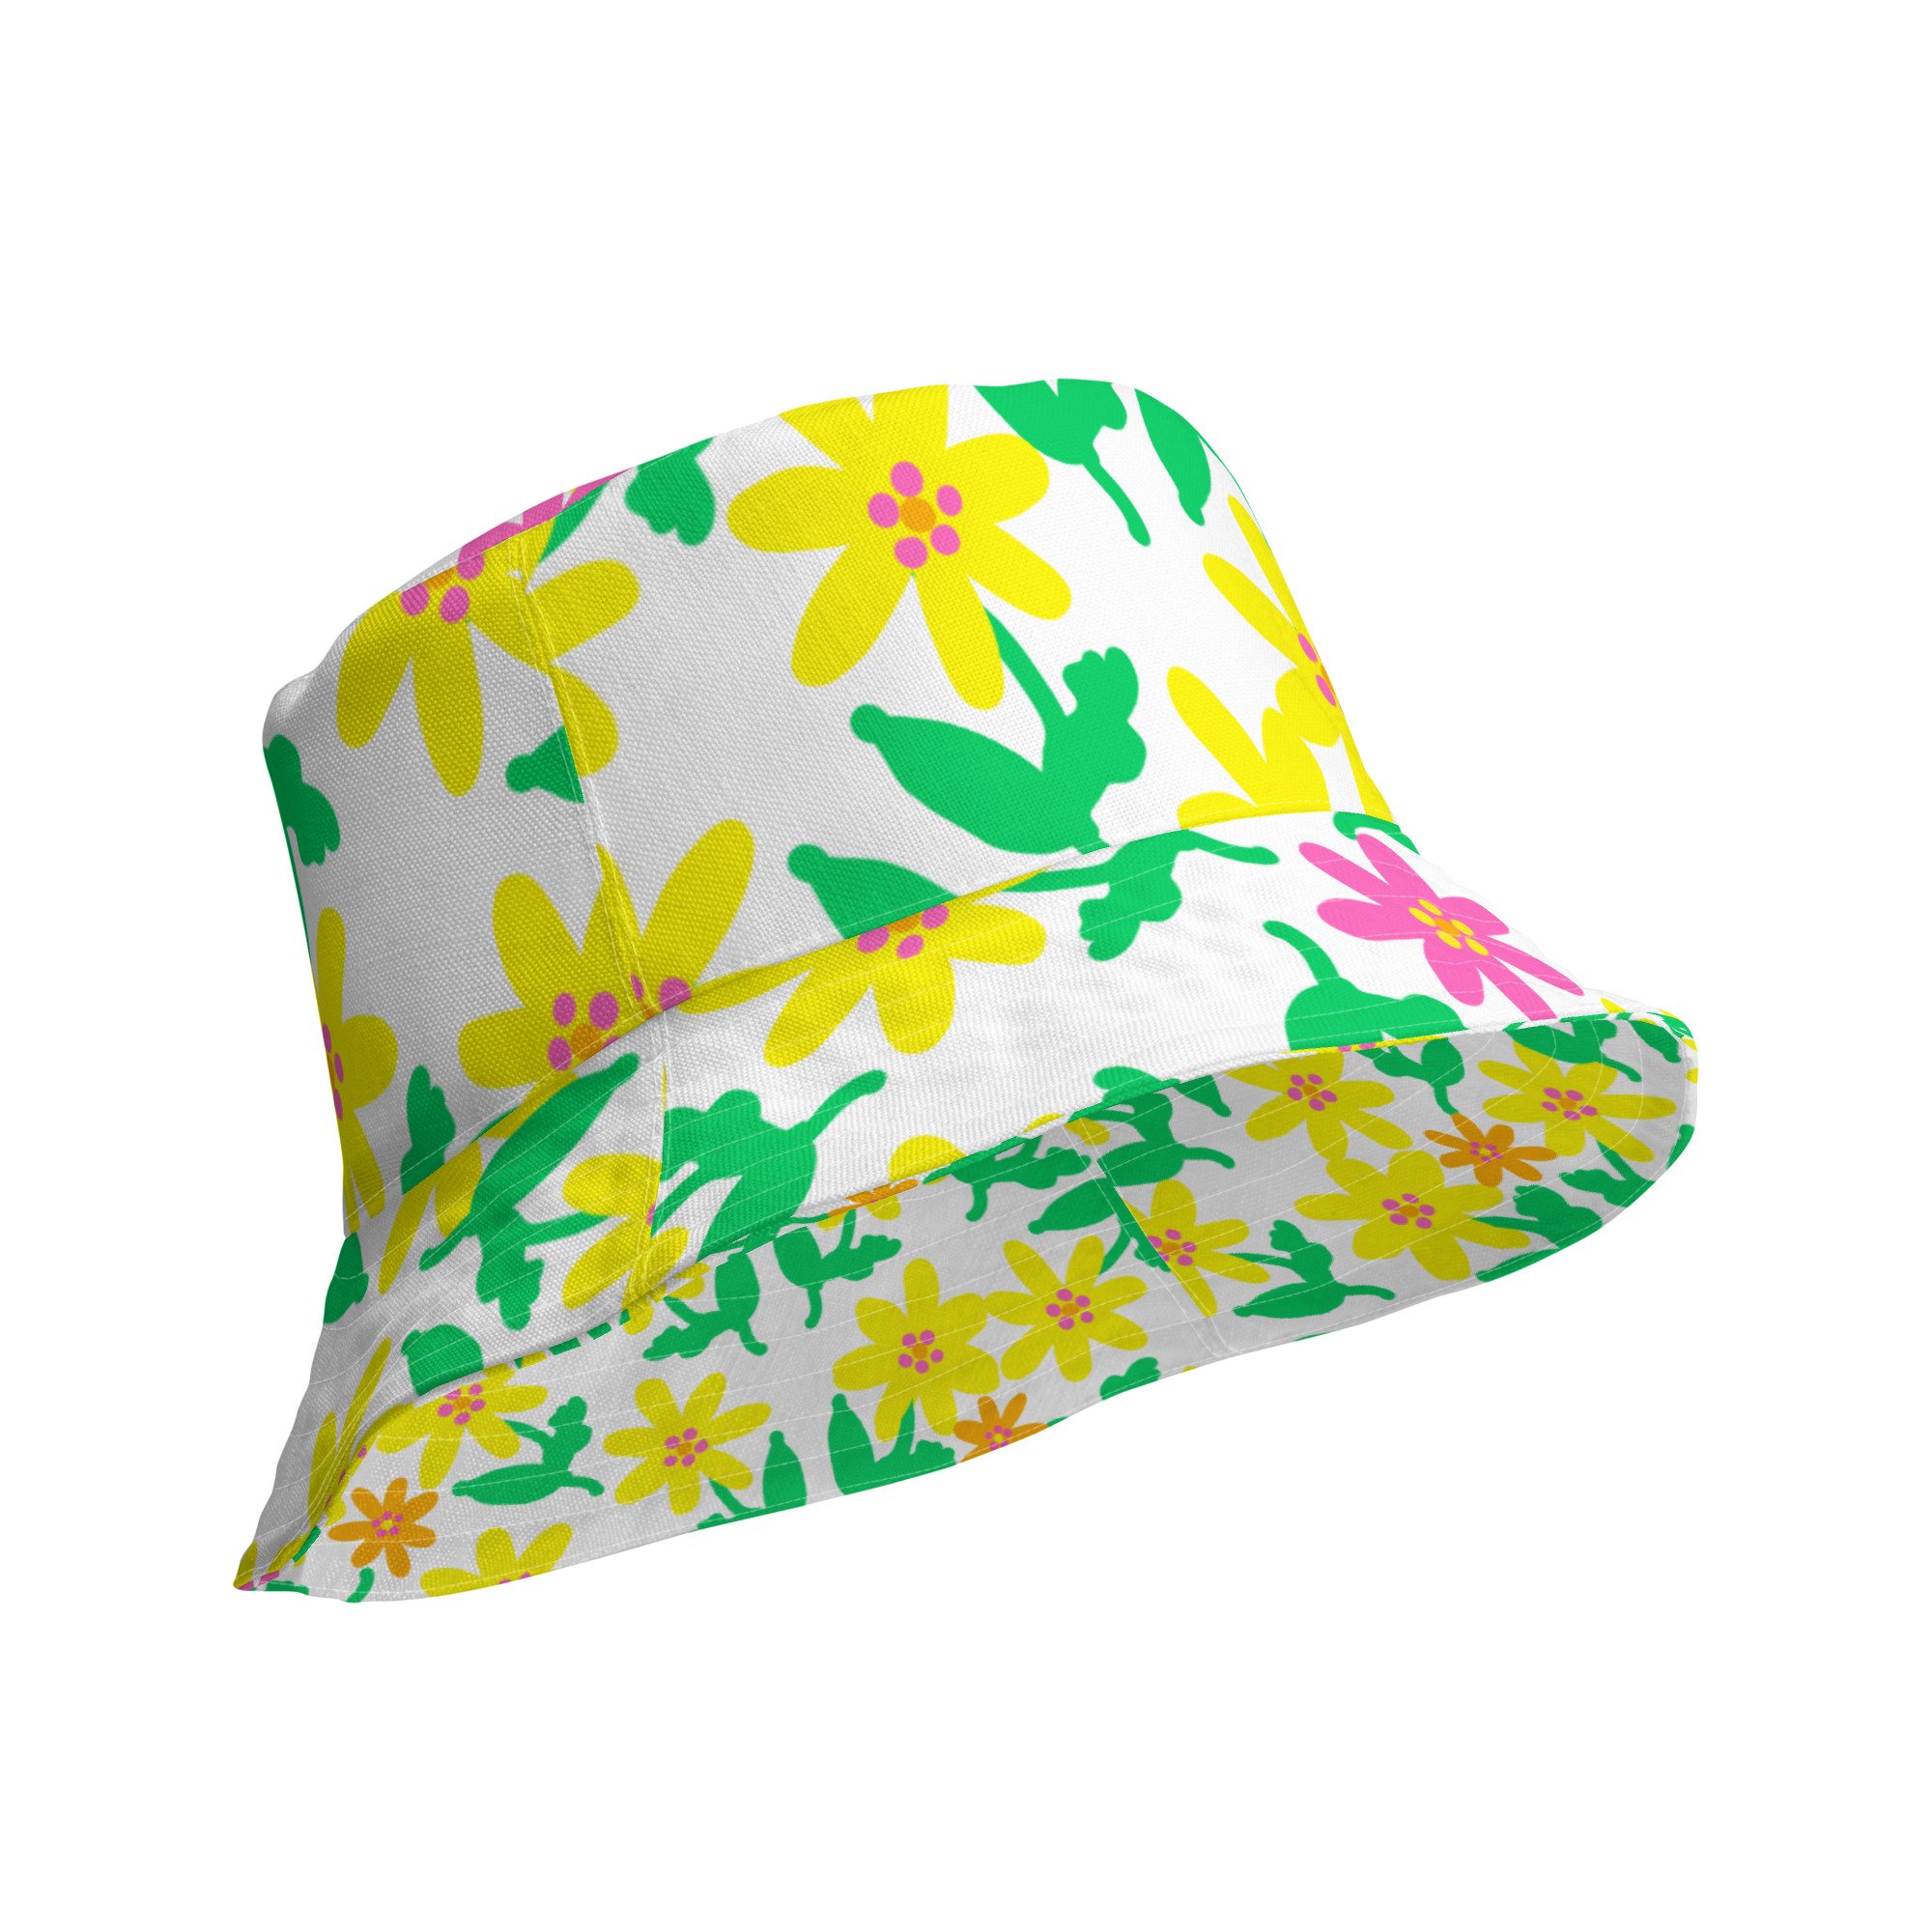 New! Spring Summer 2023. Reversible Cotton Bucket Hat With Bright